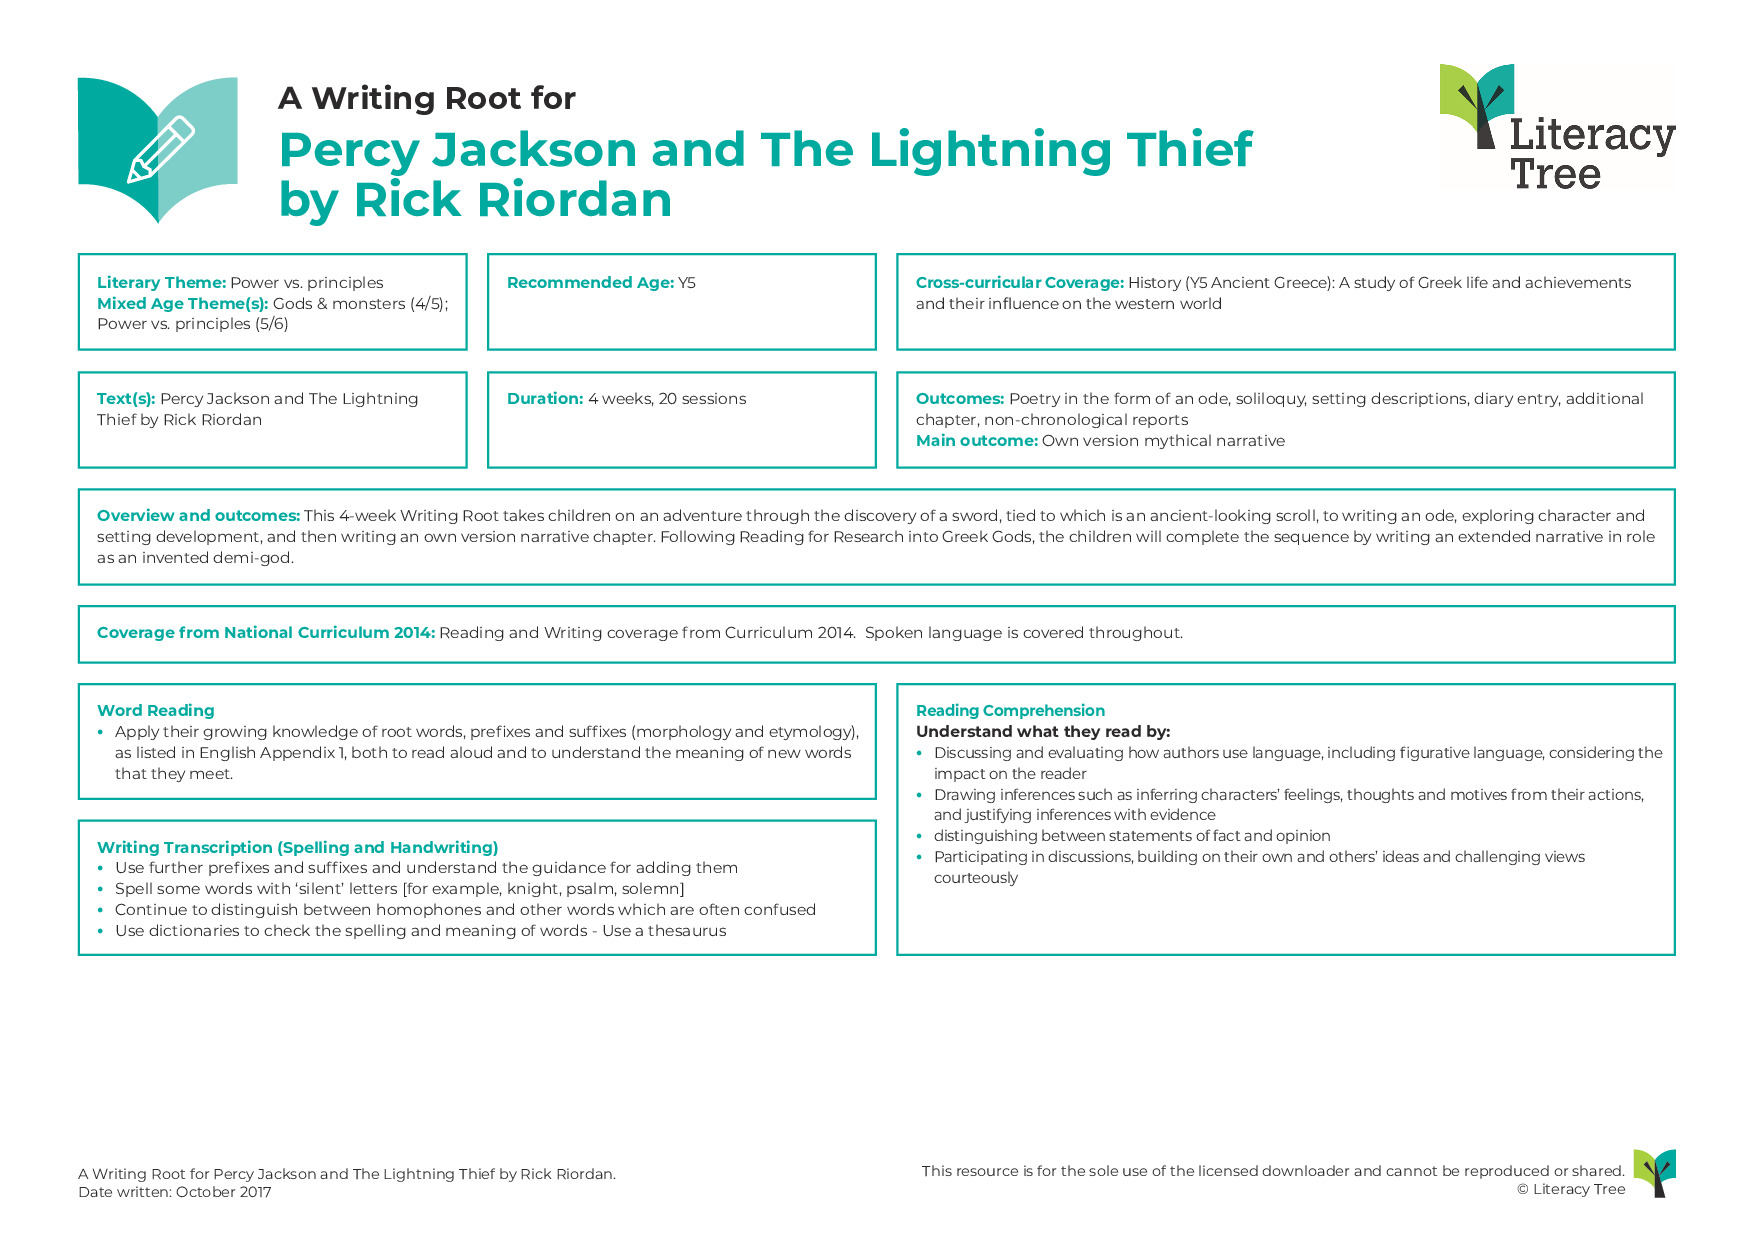 A Writing Root for Percy Jackson and the Lightning Thief